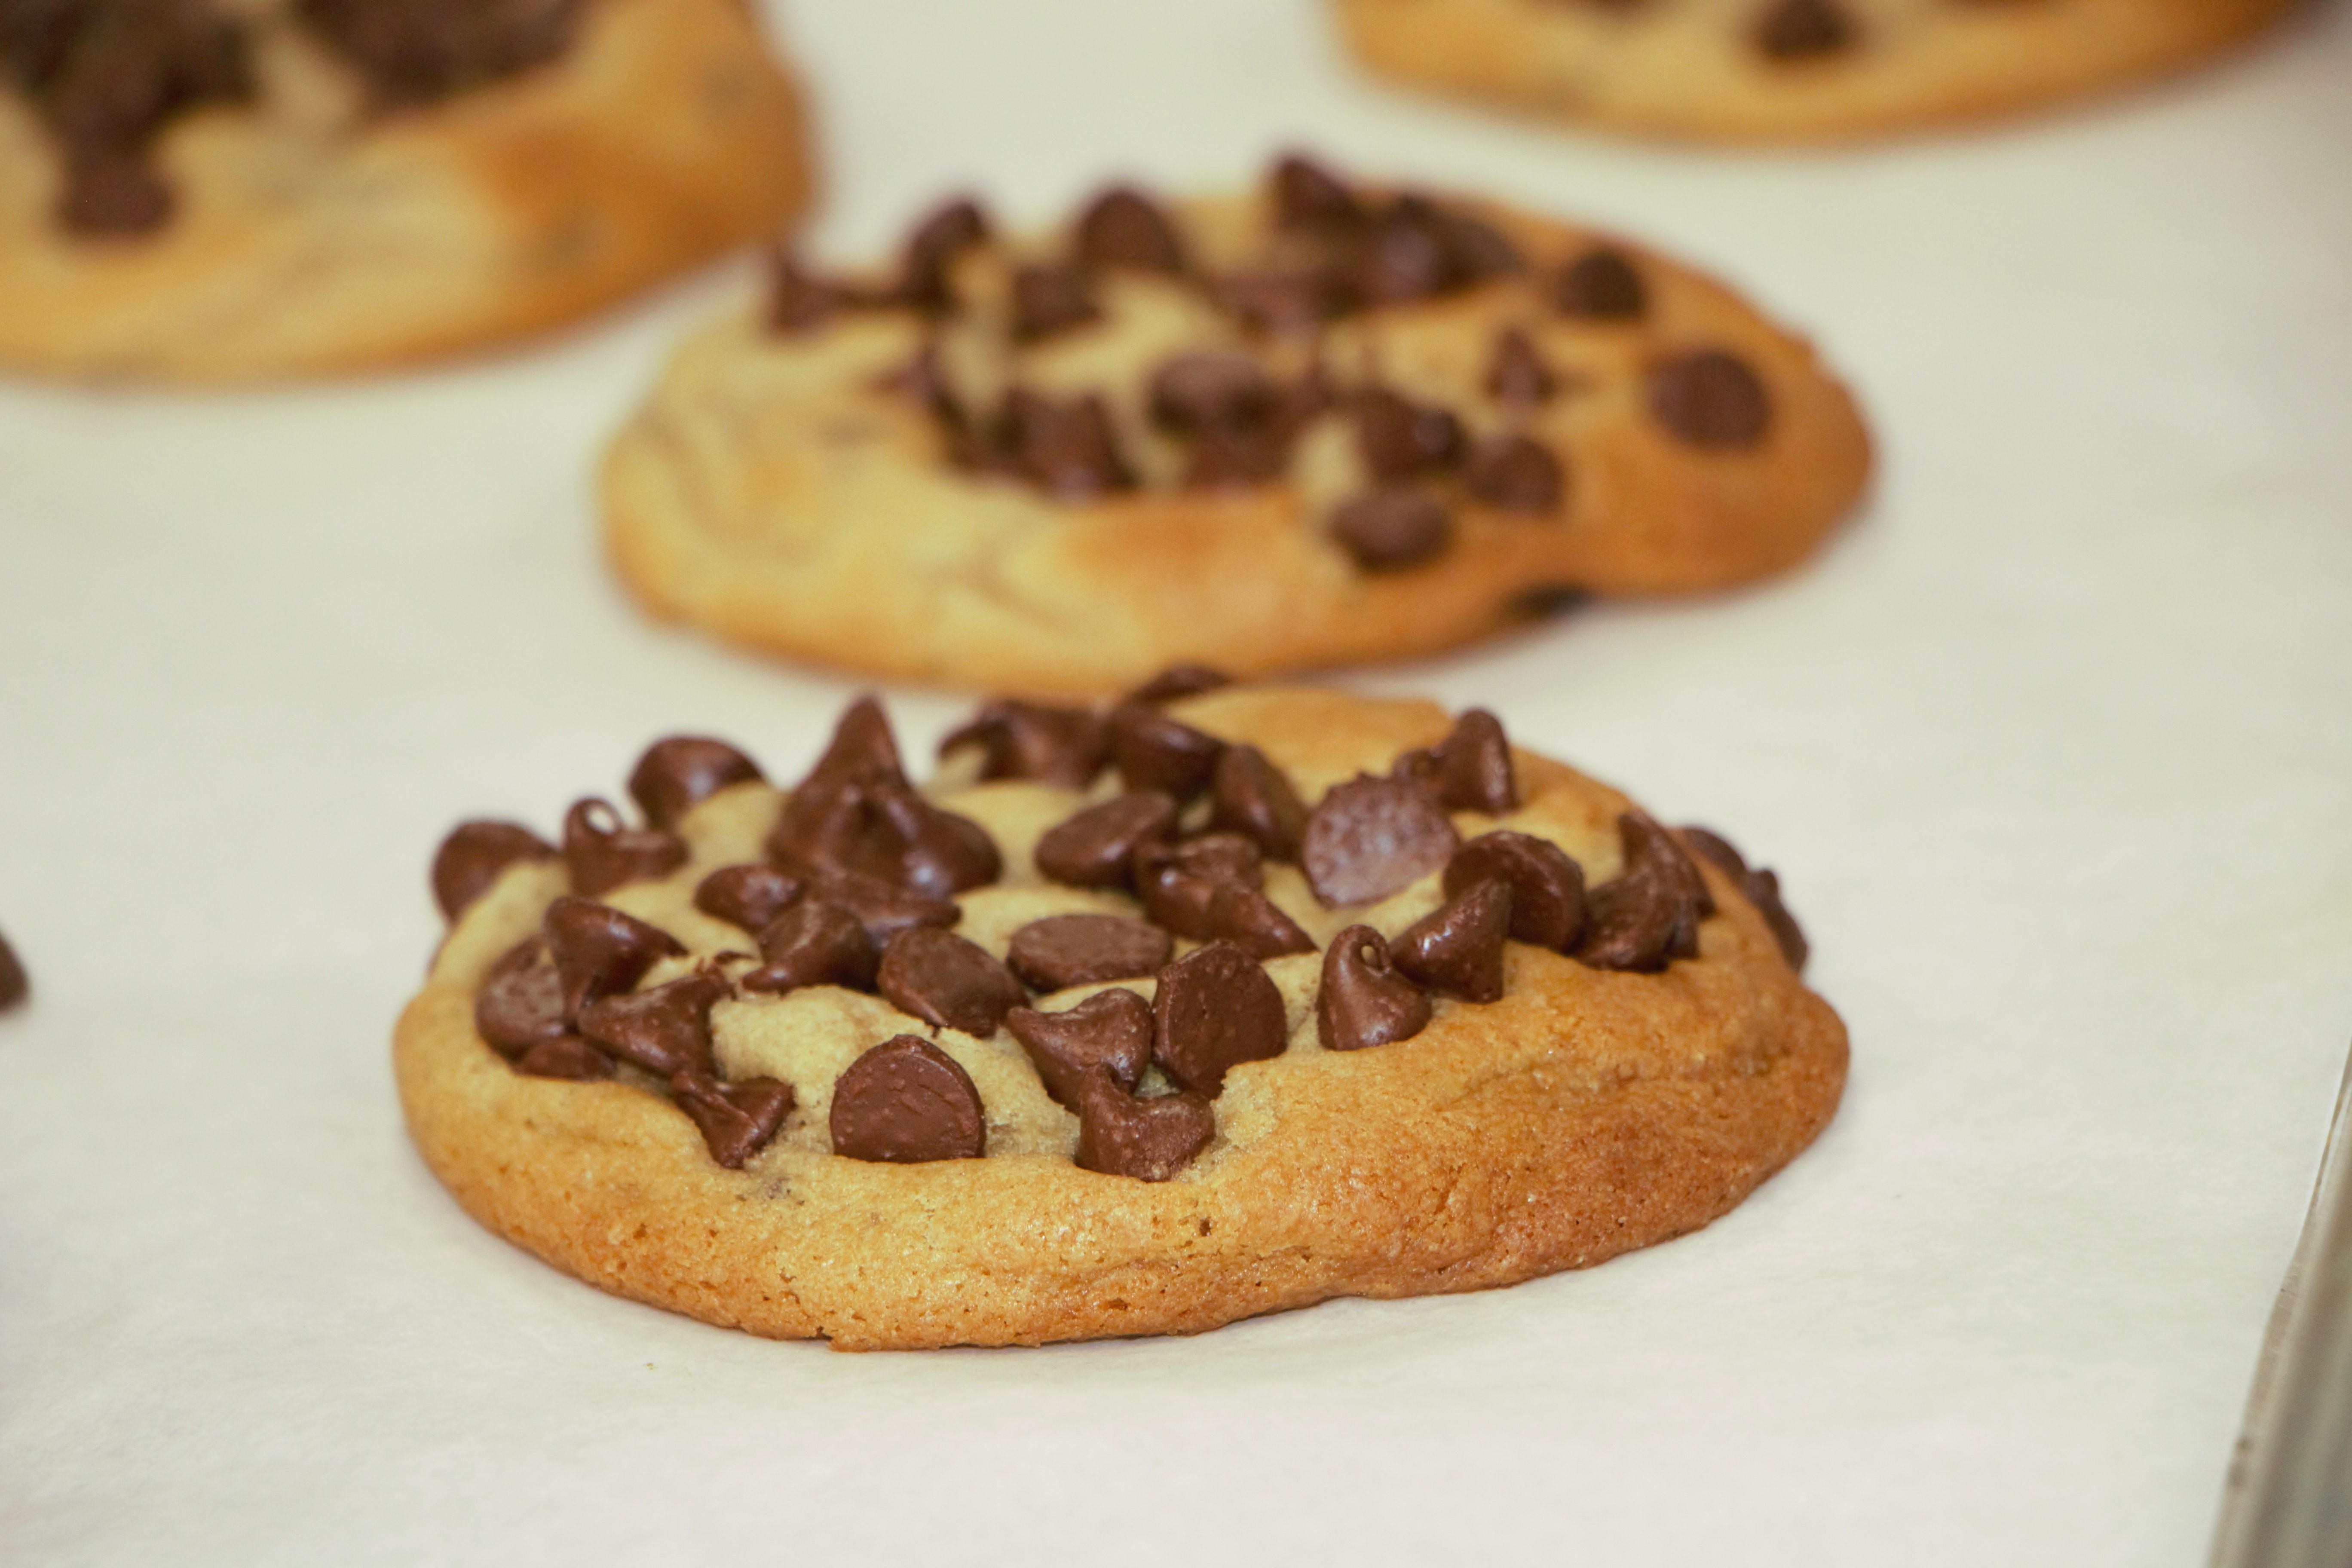 Becky's Chocolate chips